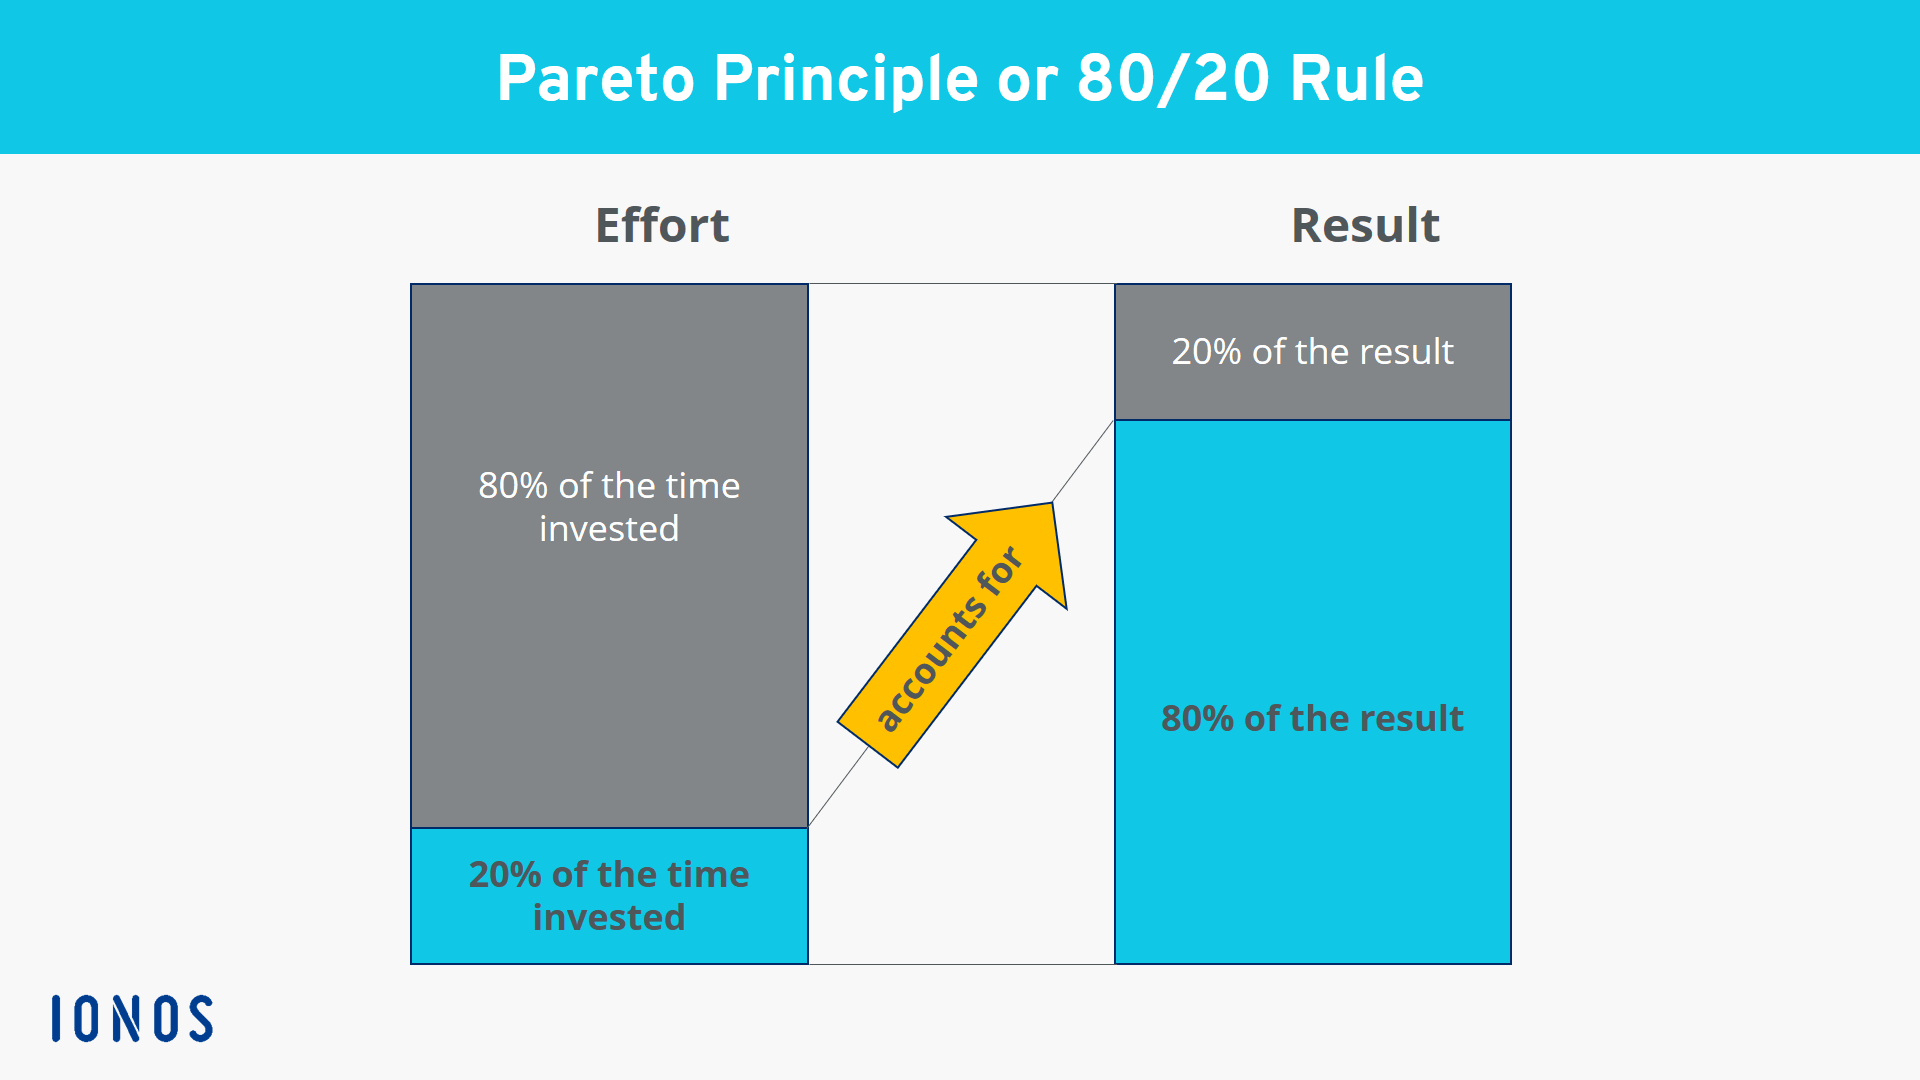 Pareto principle or 80/20 rule: 80% of the results come from 20% of the effort